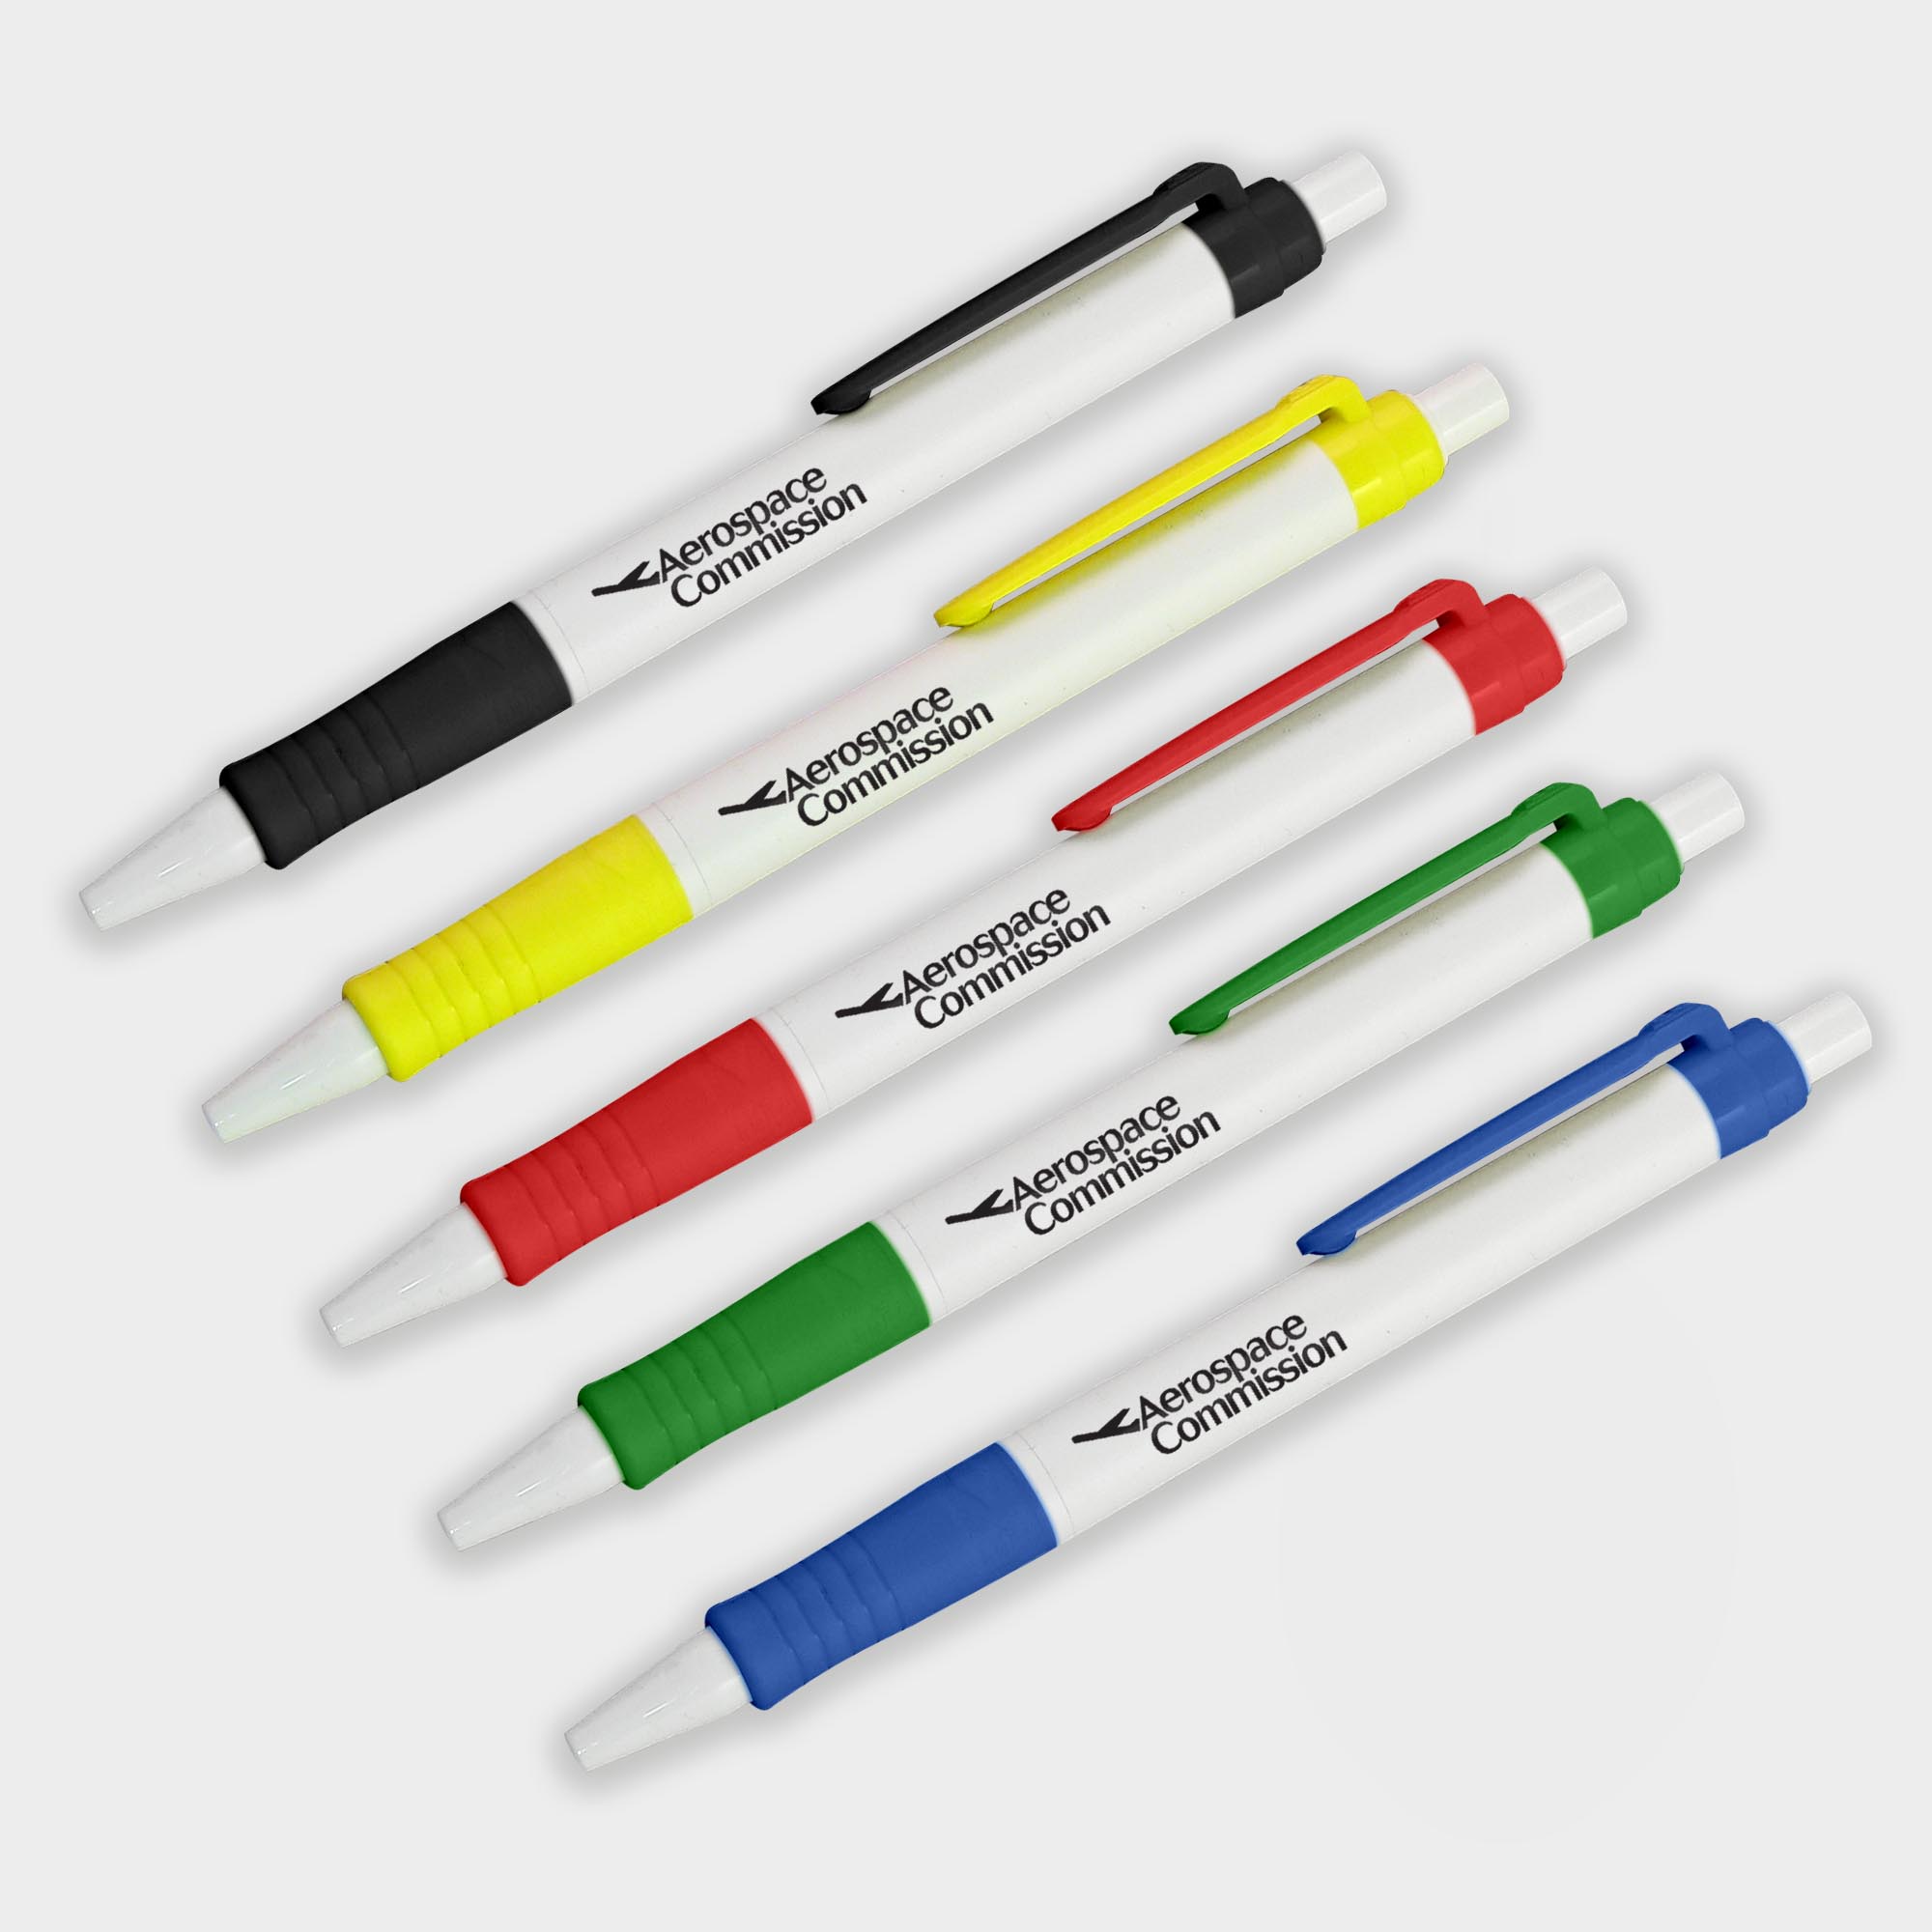 The Green & Good Bio Solid Biodegradable Pen. Corn based plastic pen with a solid coloured body and a push button. Available in a wide range of trim colours. Black ink as standard.